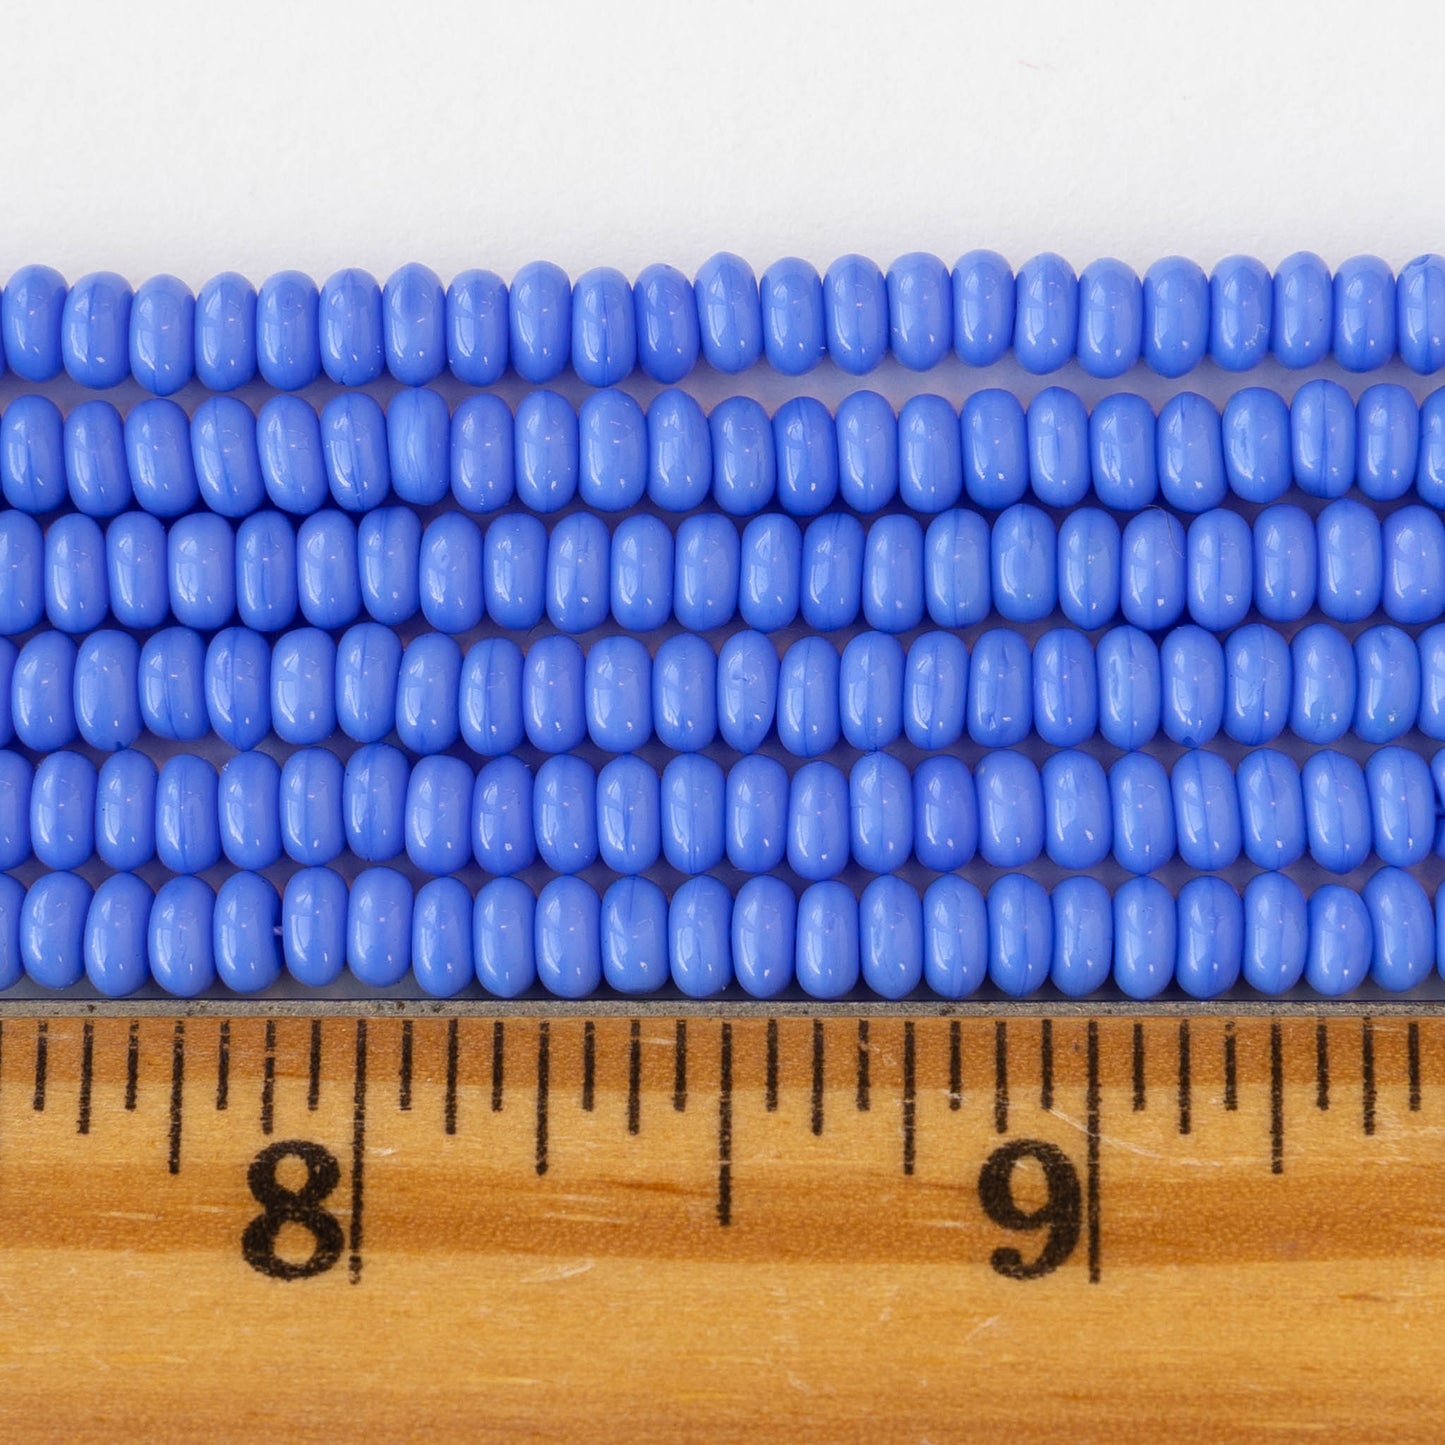 4mm Glass Rondelle Beads - Opaque Periwinkle Blue -120 Beads